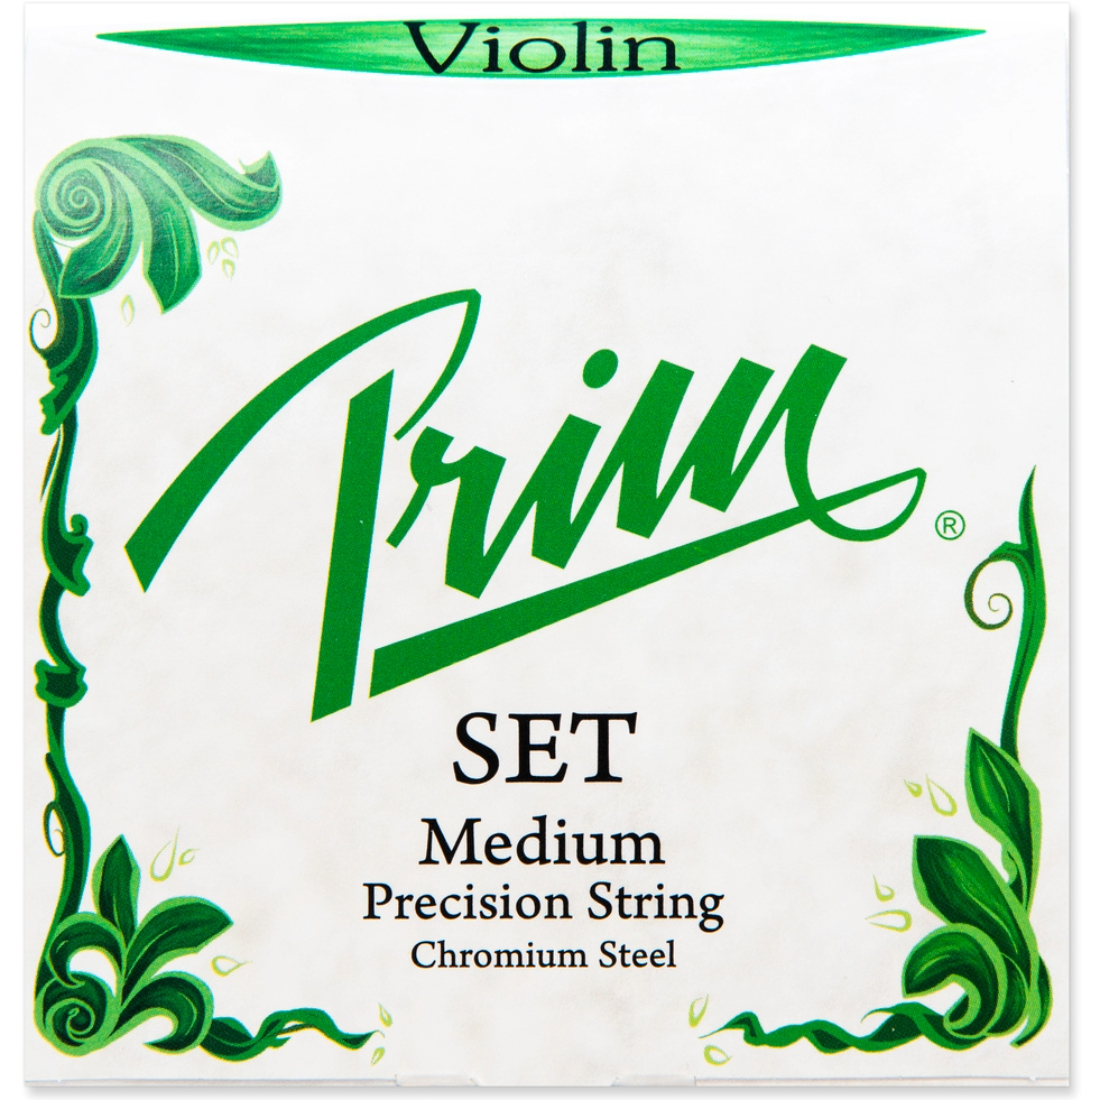 White and green box of Prim steelcore violin strings